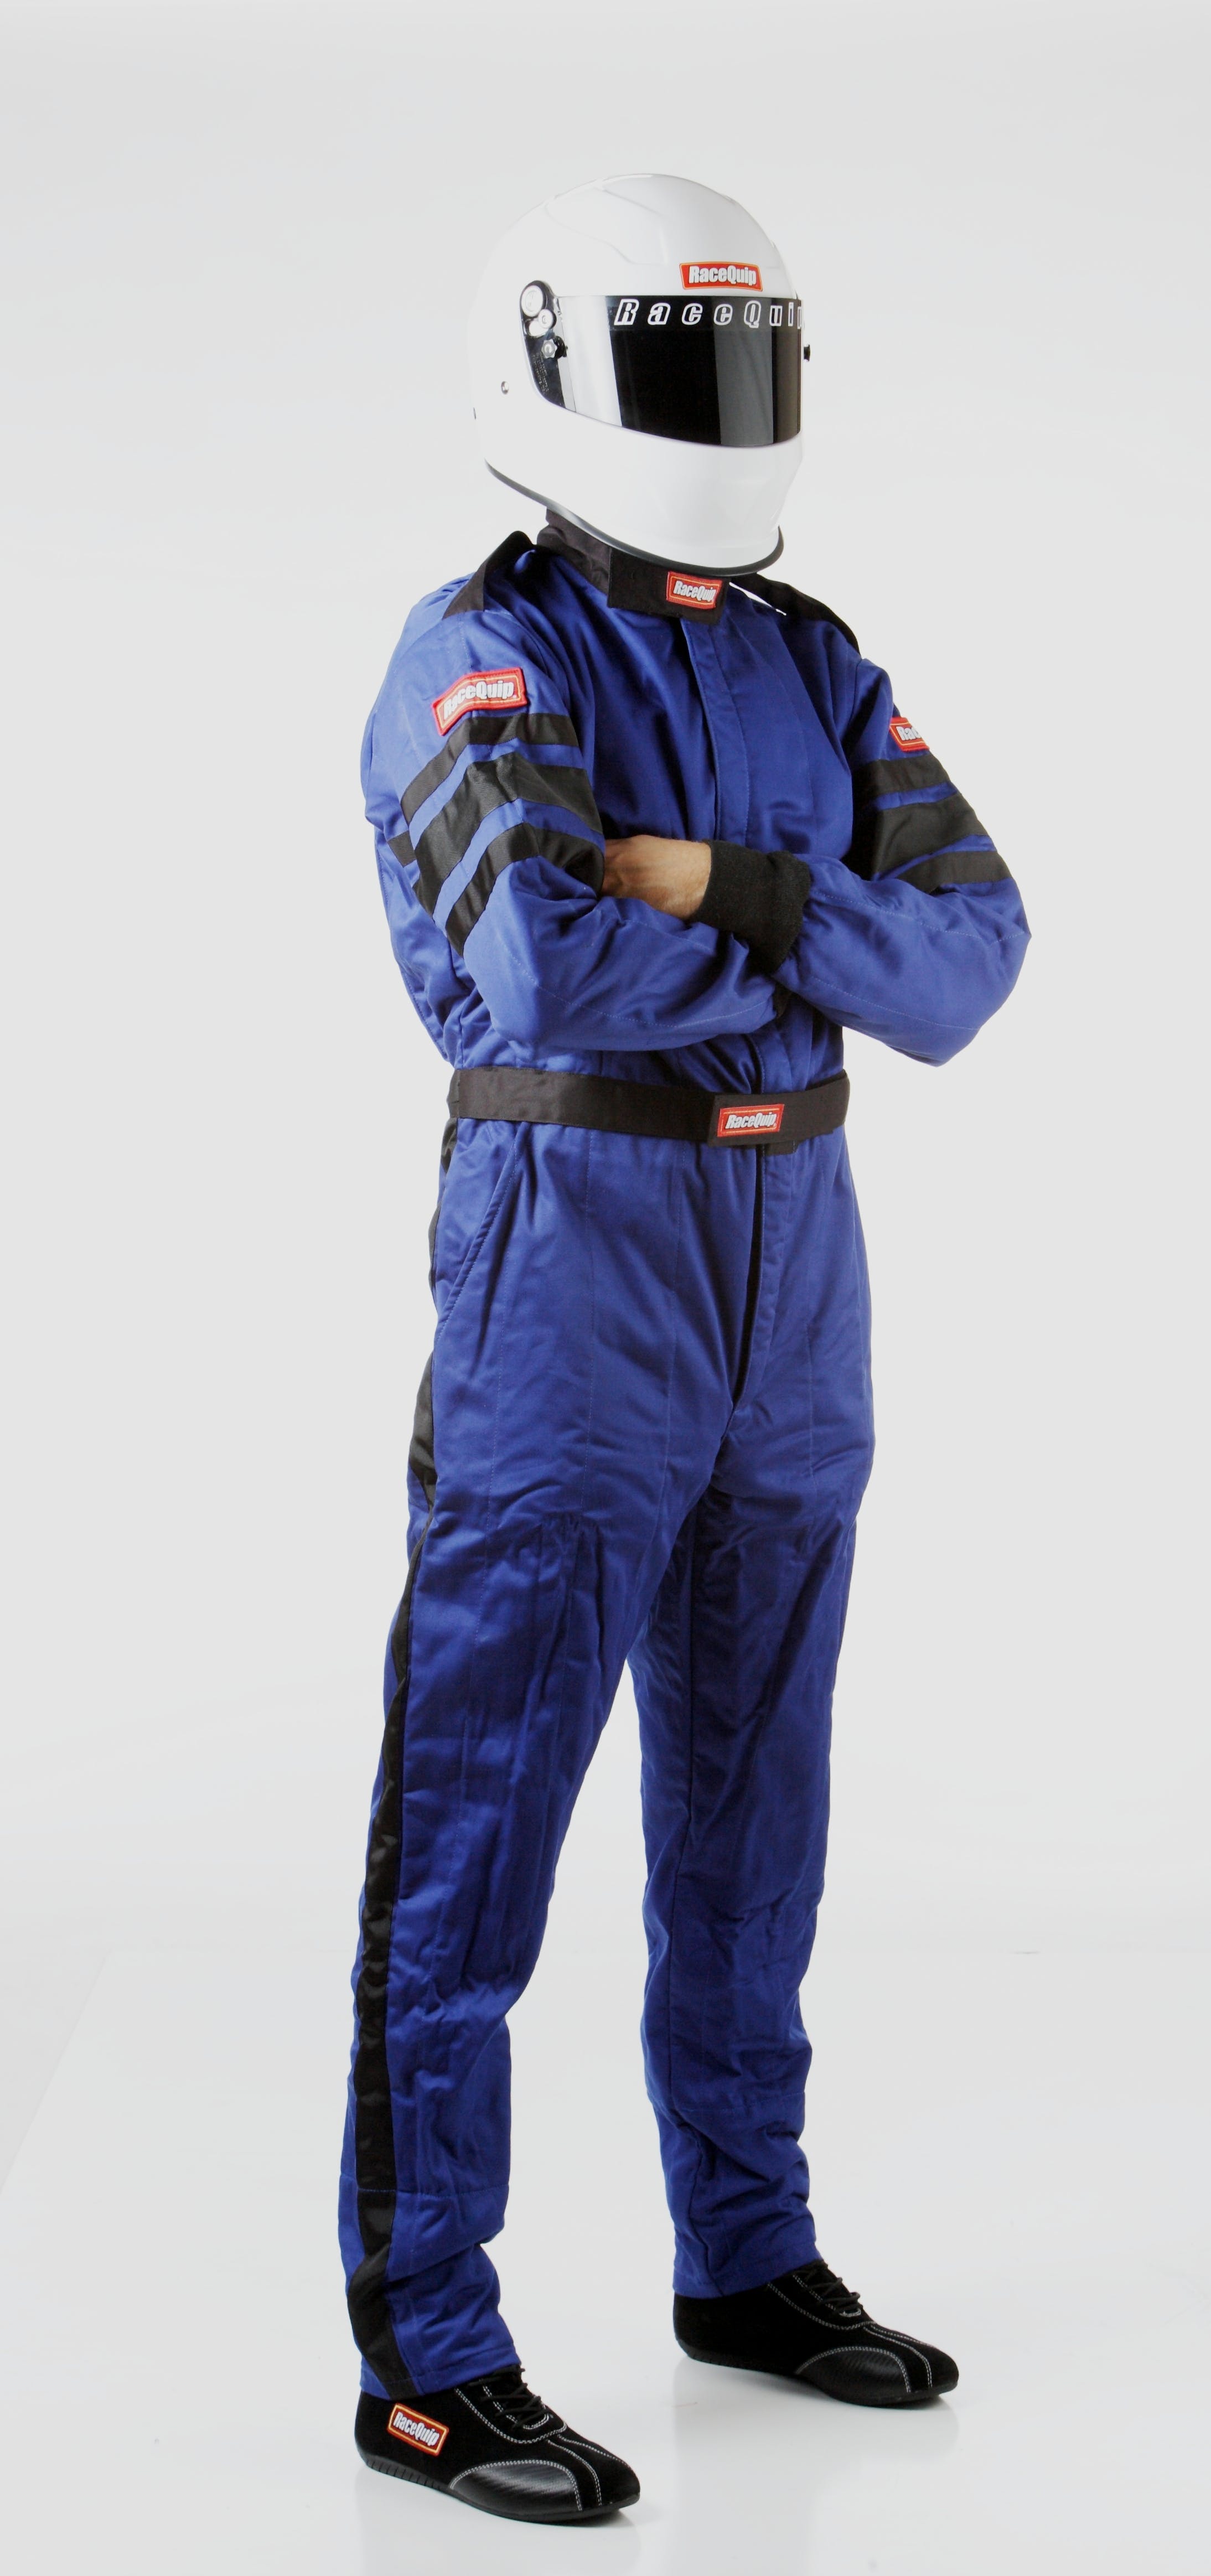 RaceQuip 120028 SFI-5 Pyrovatex One-Piece Multi-Layer Racing Fire Suit (Blue, 3X-Large)